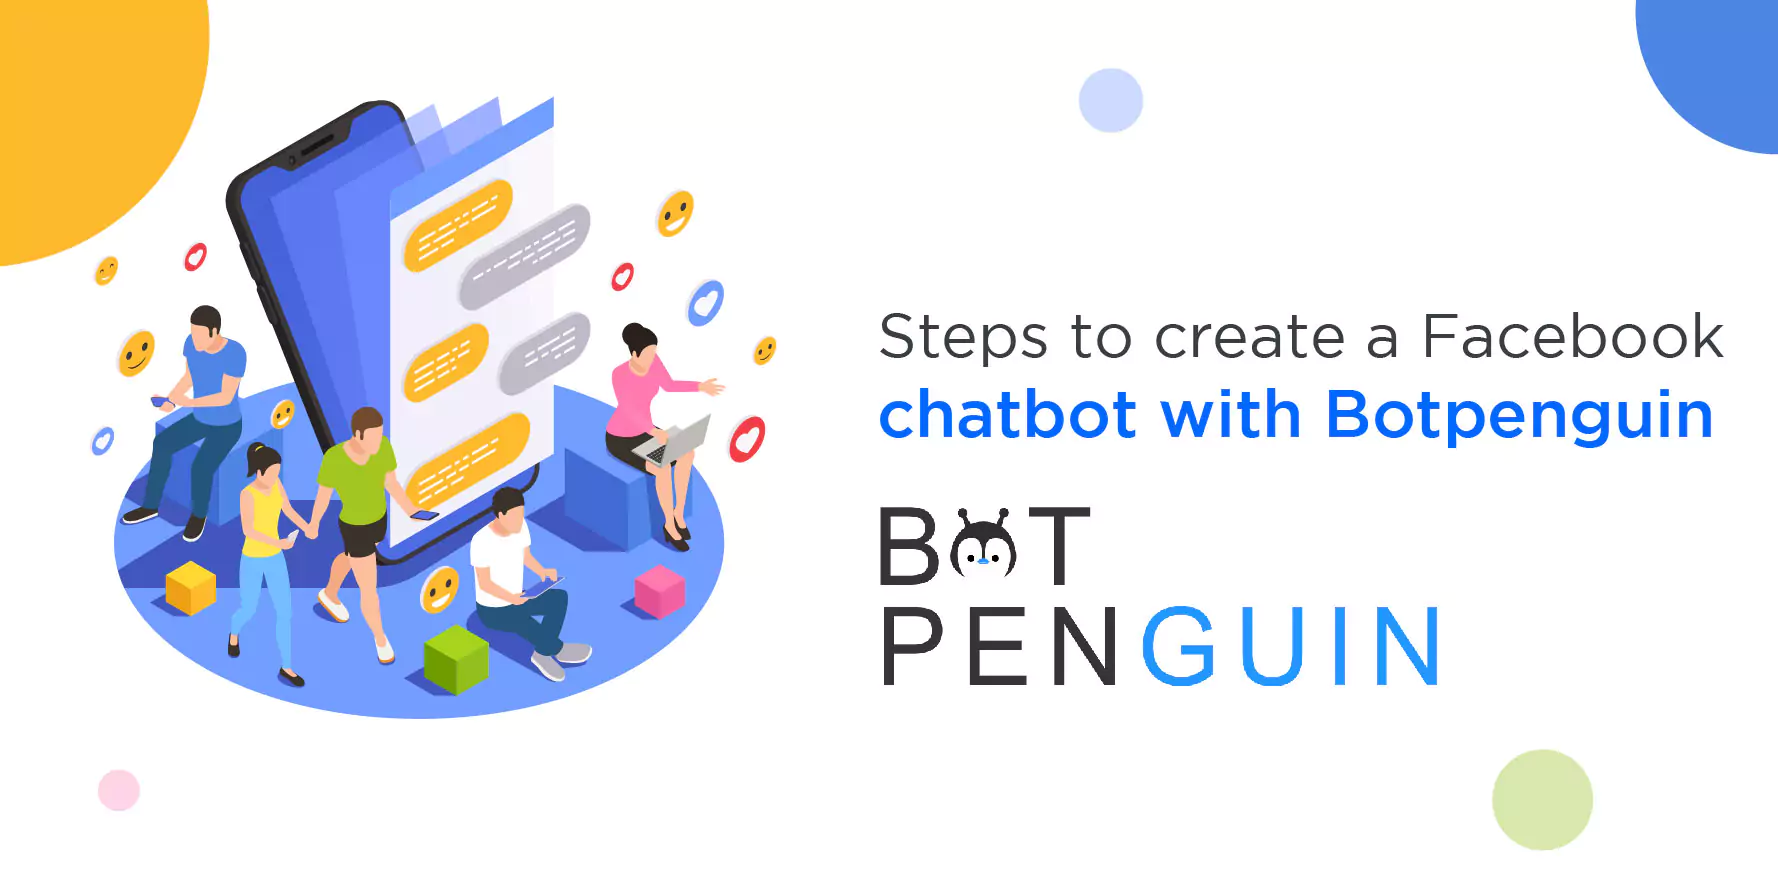 Steps to create a Facebook chatbot with Botpenguin